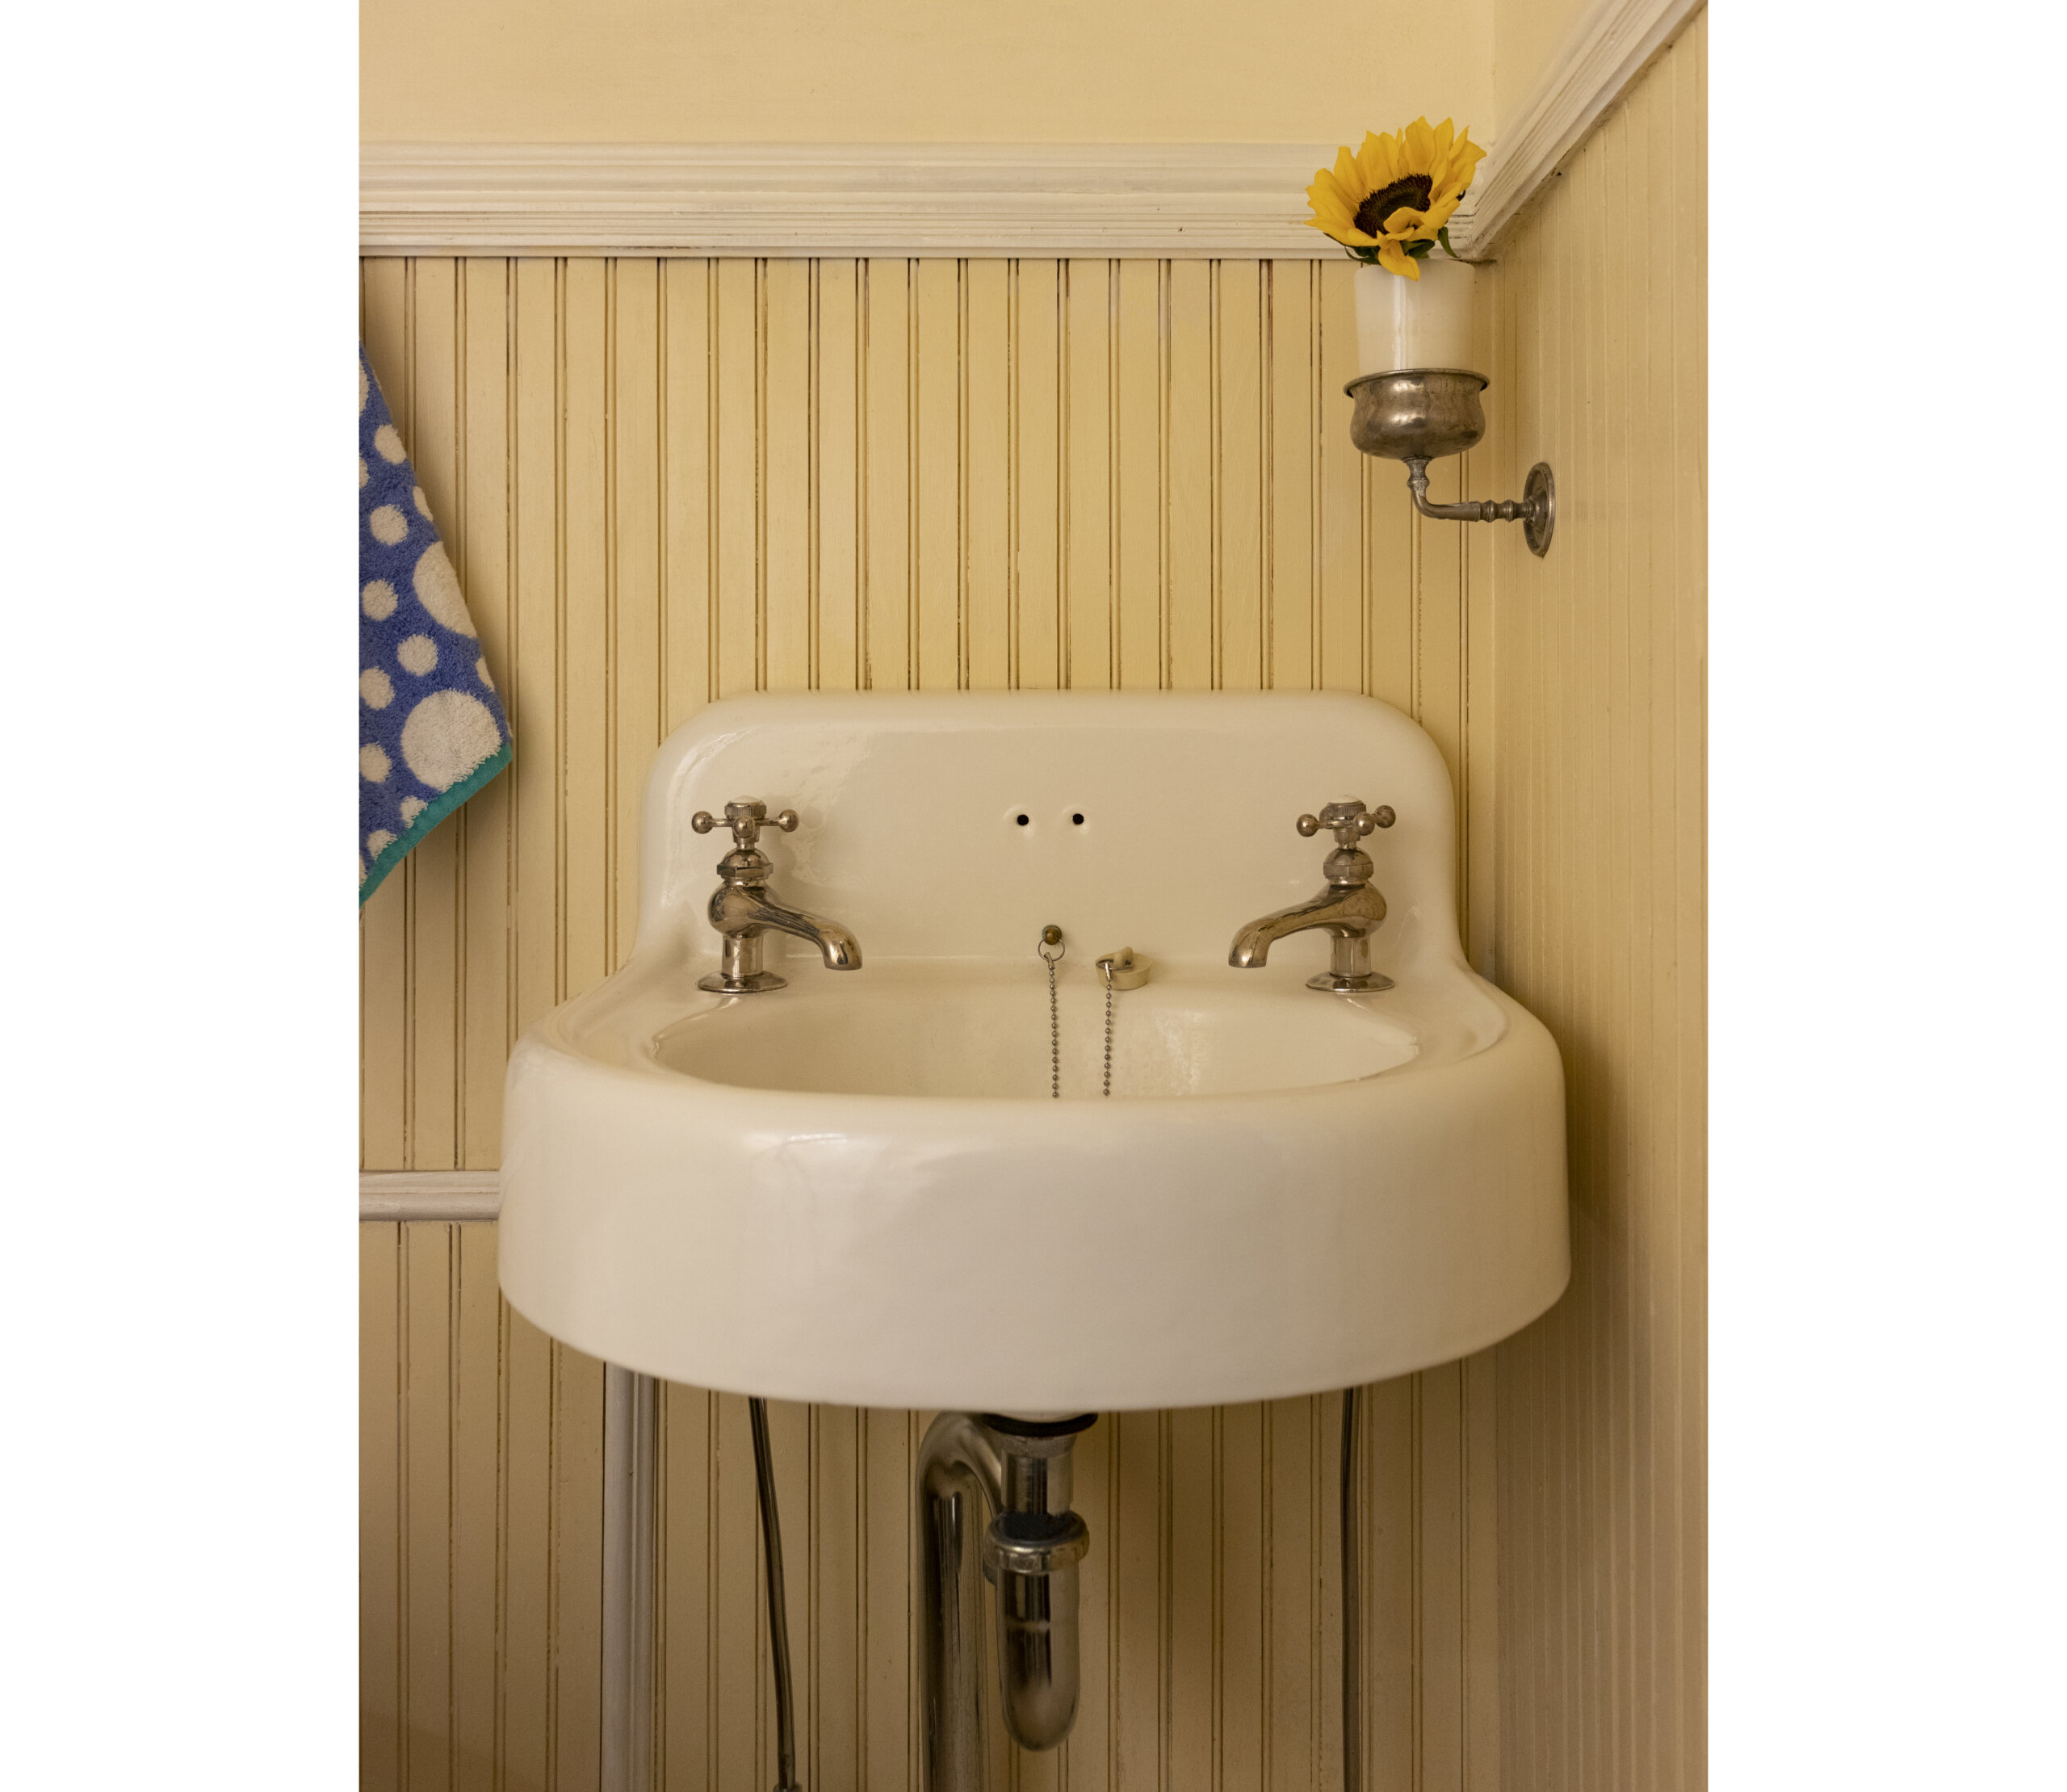 reglazed sink - a vintage sink with a cup holder above filled with a sunflower